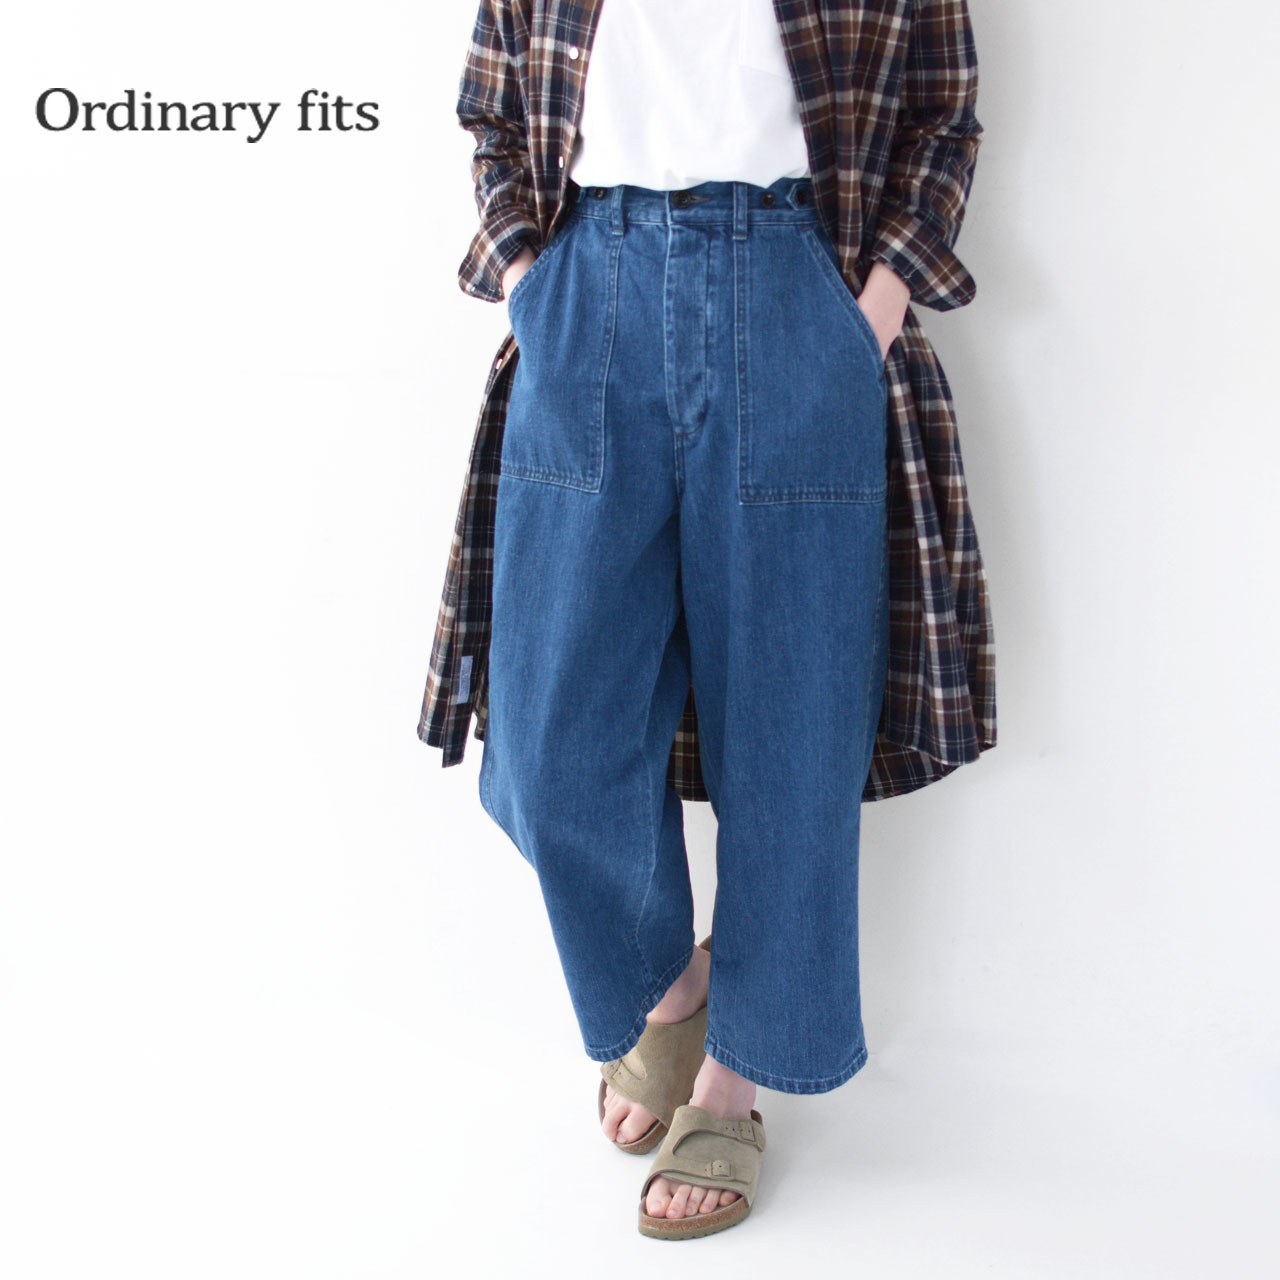 ordinary fits [オーディナリーフィッツ] JAMES PANTS used [OF-P045]_f0051306_08562330.jpg